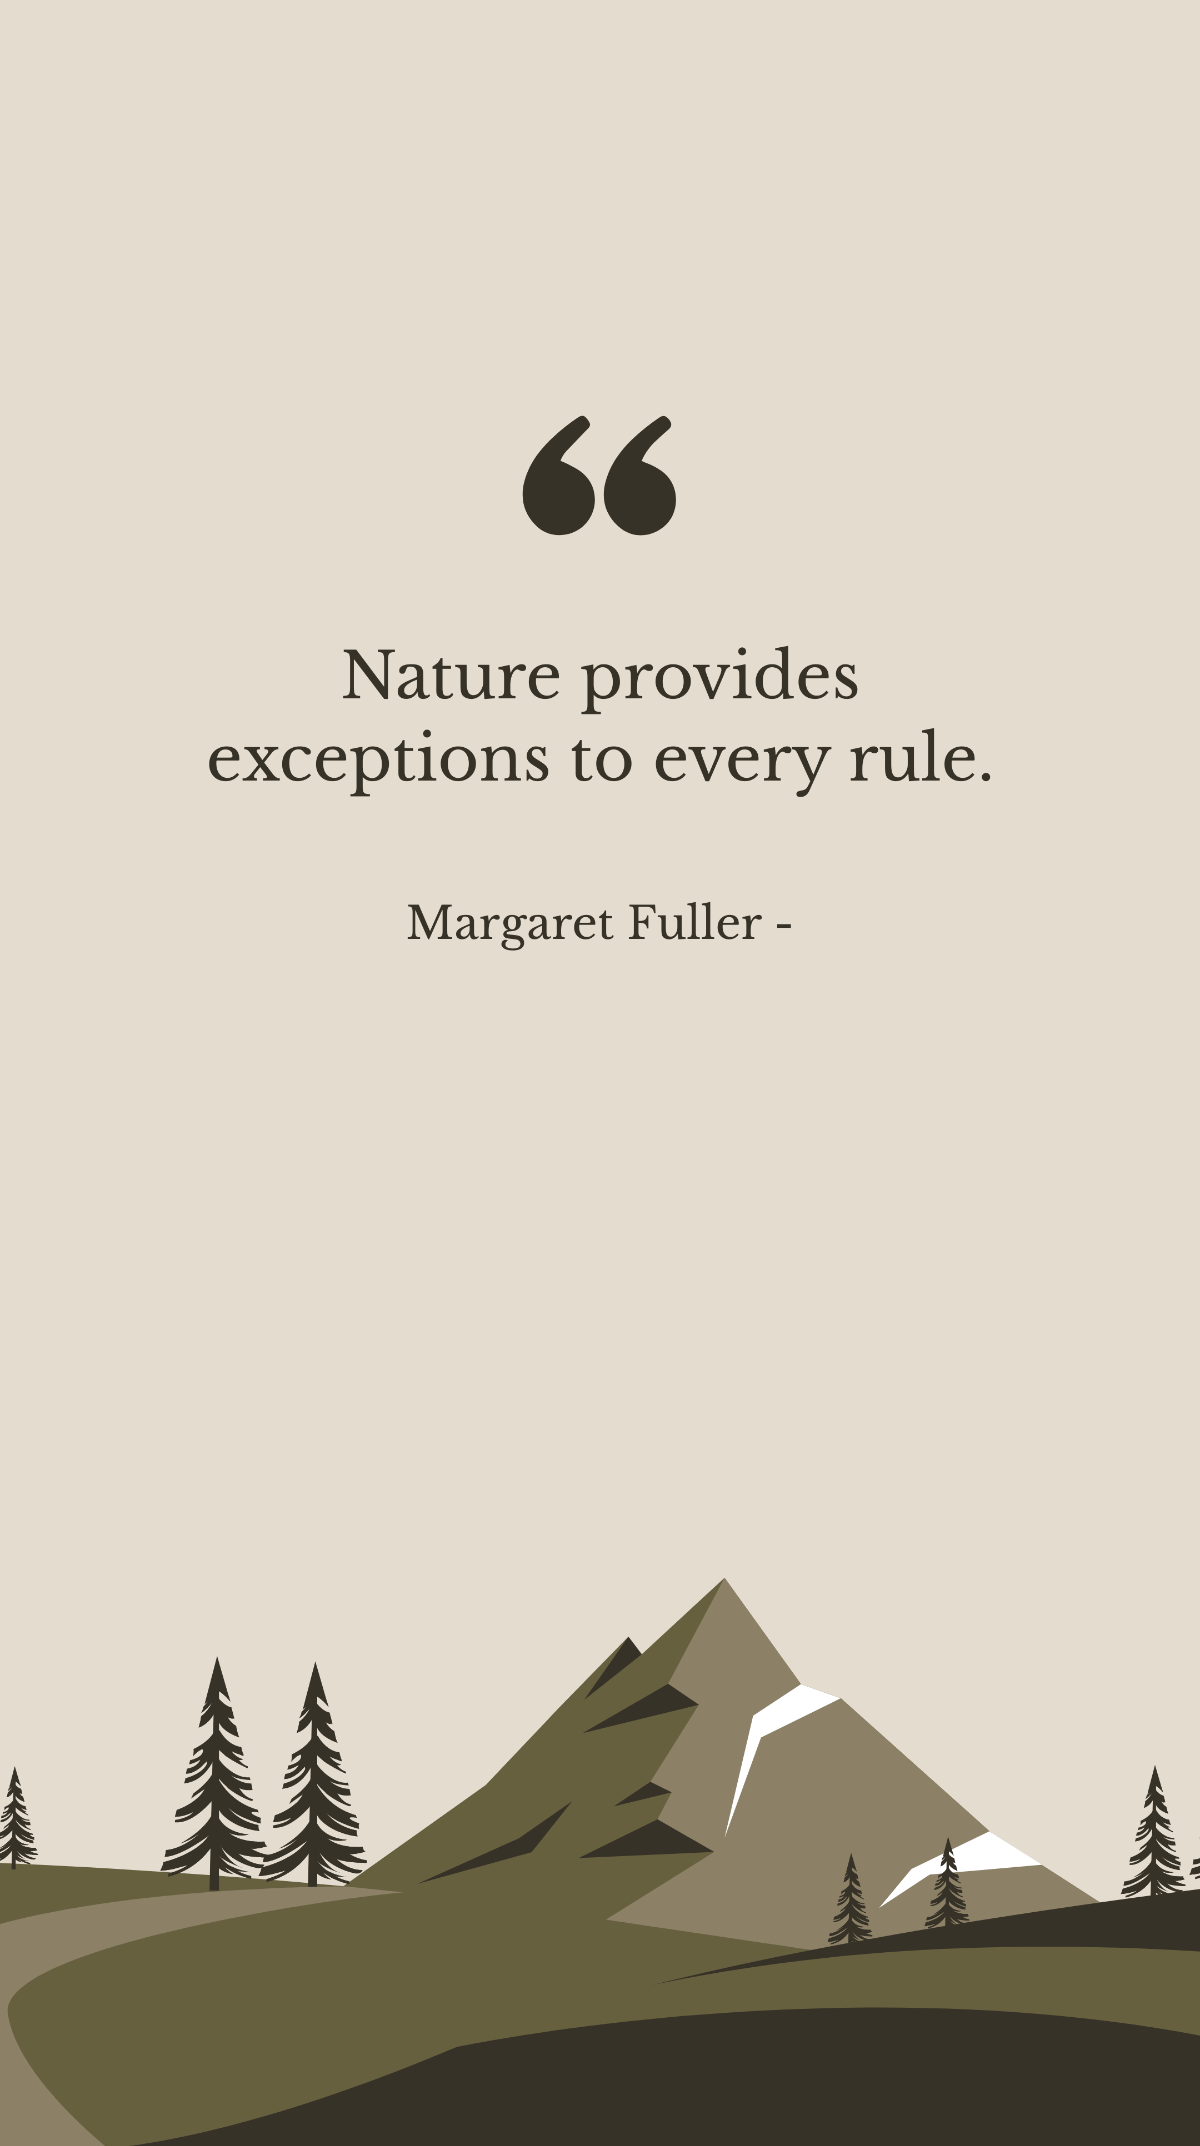 Margaret Fuller - Nature provides exceptions to every rule.  Template